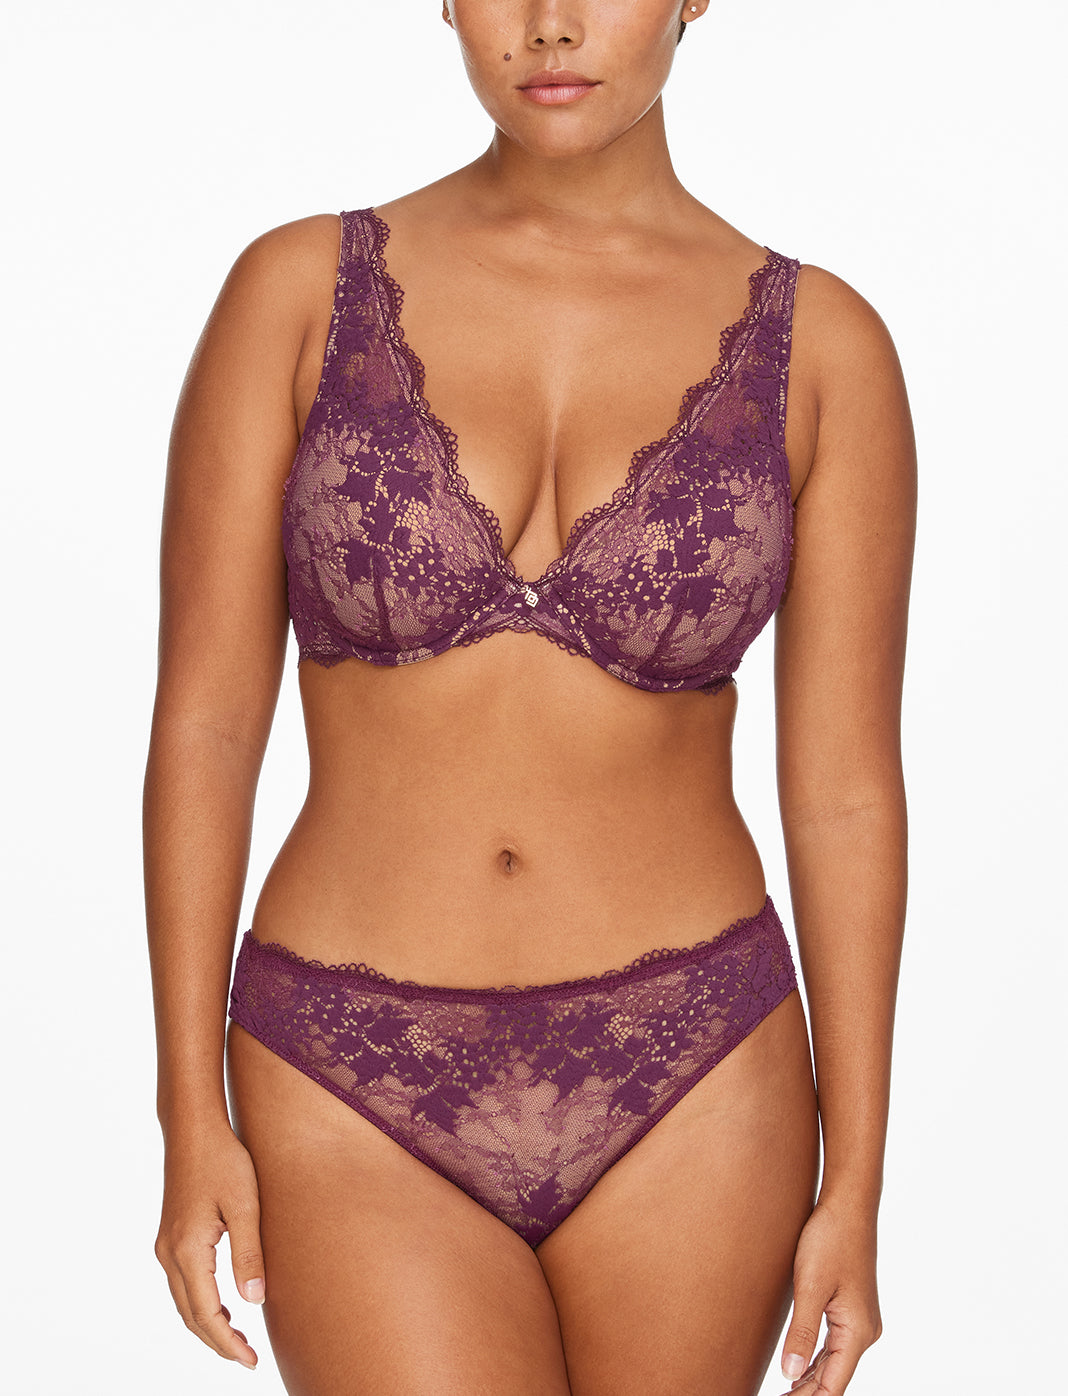 Just Dropping This List of Pretty Lingerie for Smaller Busts Here…(V-Day, I  See You) - Yahoo Sports